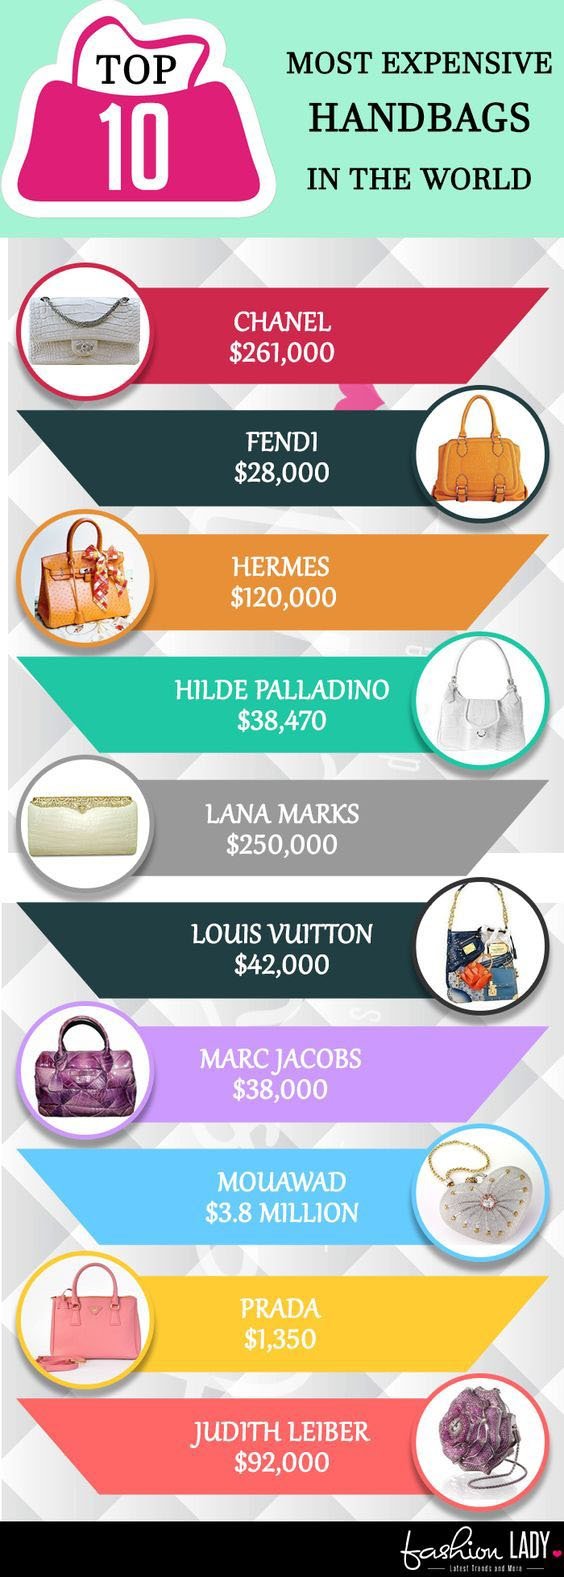 Most Expensive Handbags In The World